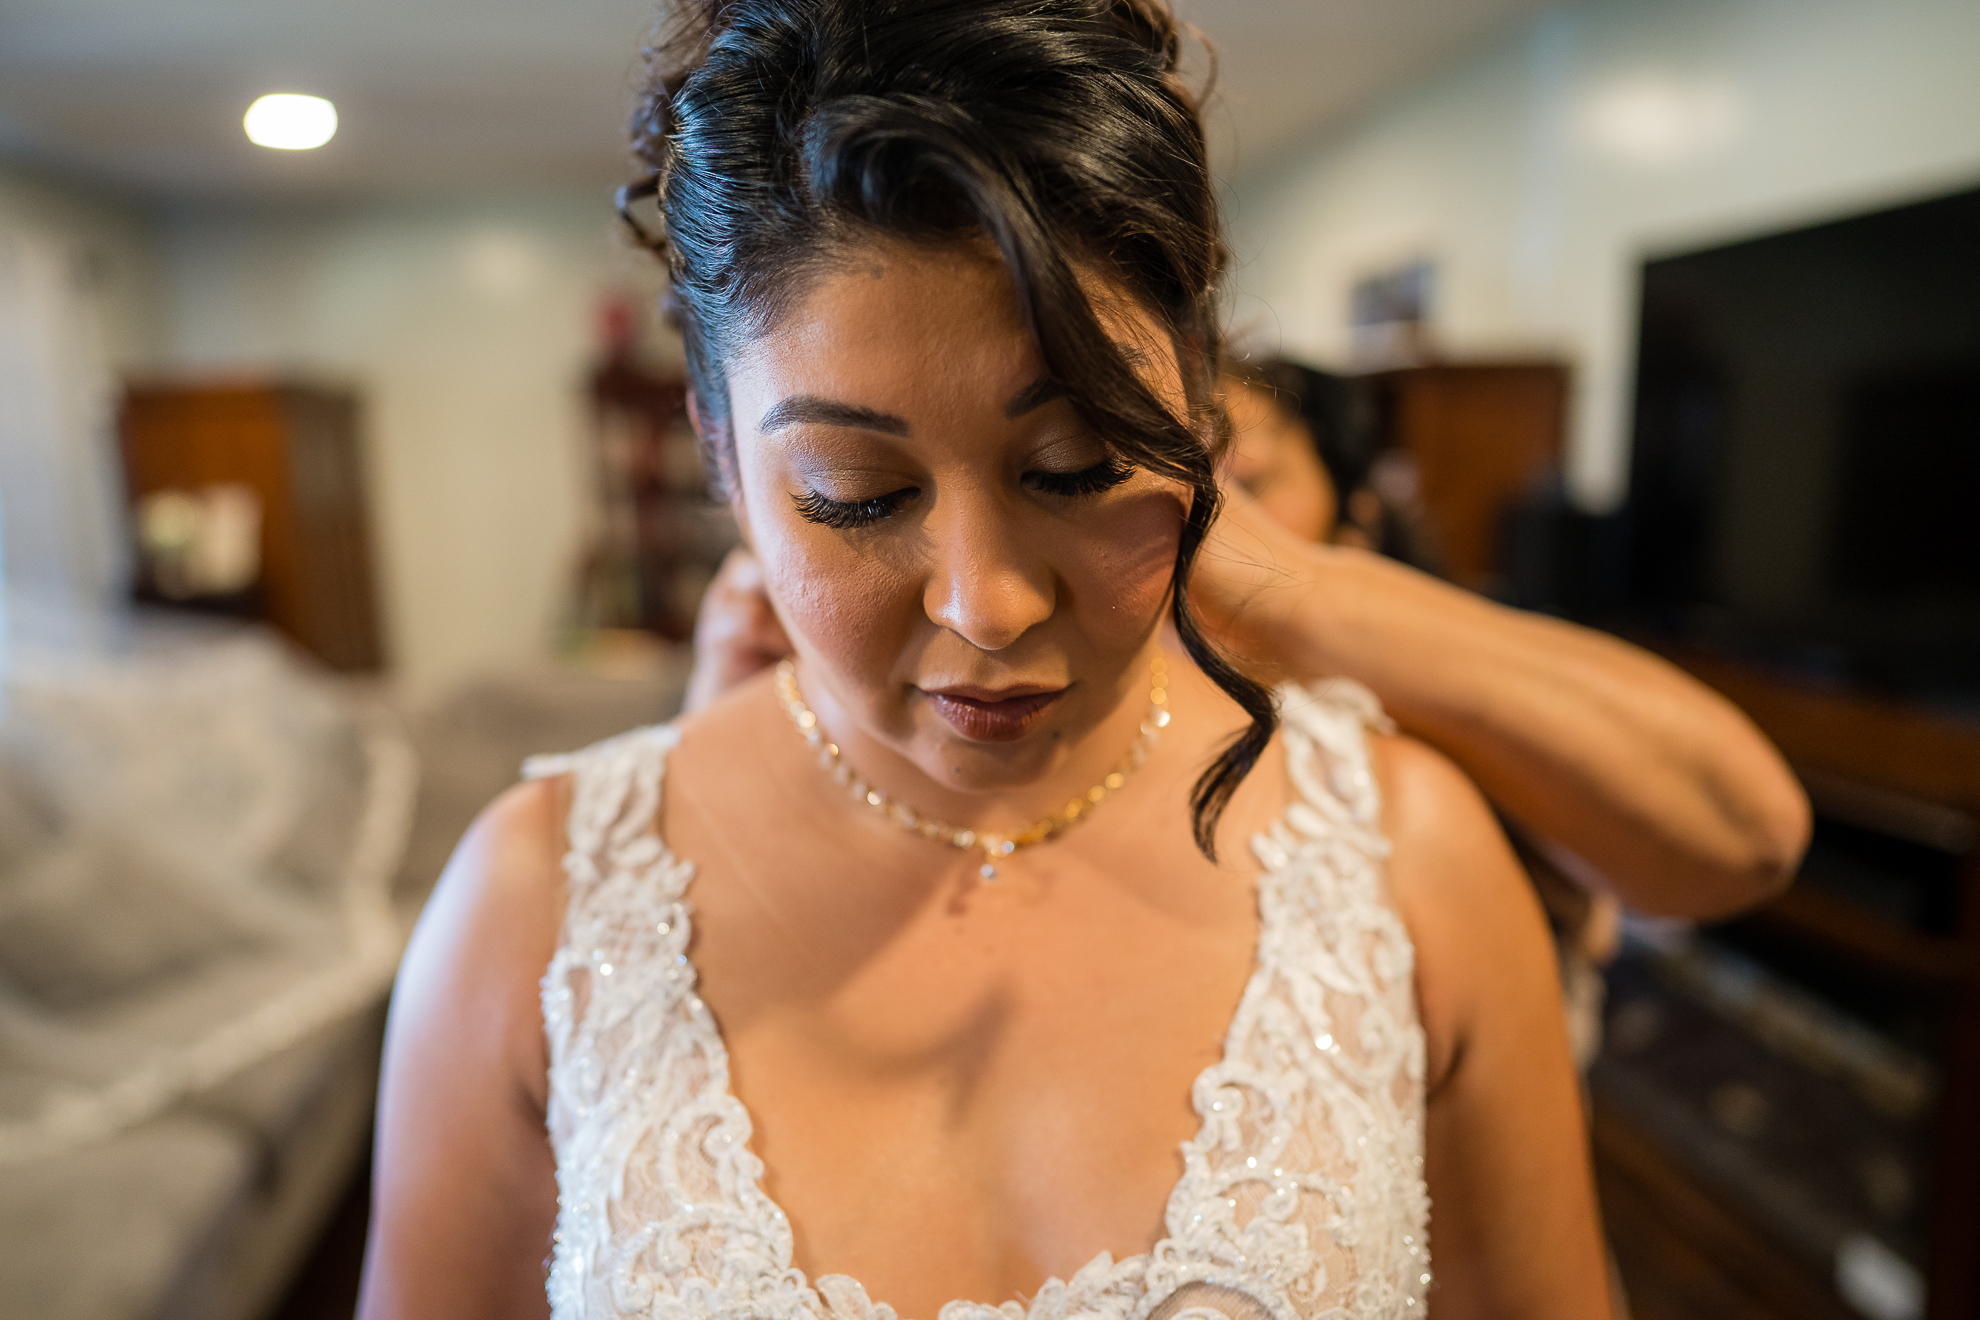 ThomasKim_photography A bride getting ready for her wedding in California, surrounded by love and anticipation.